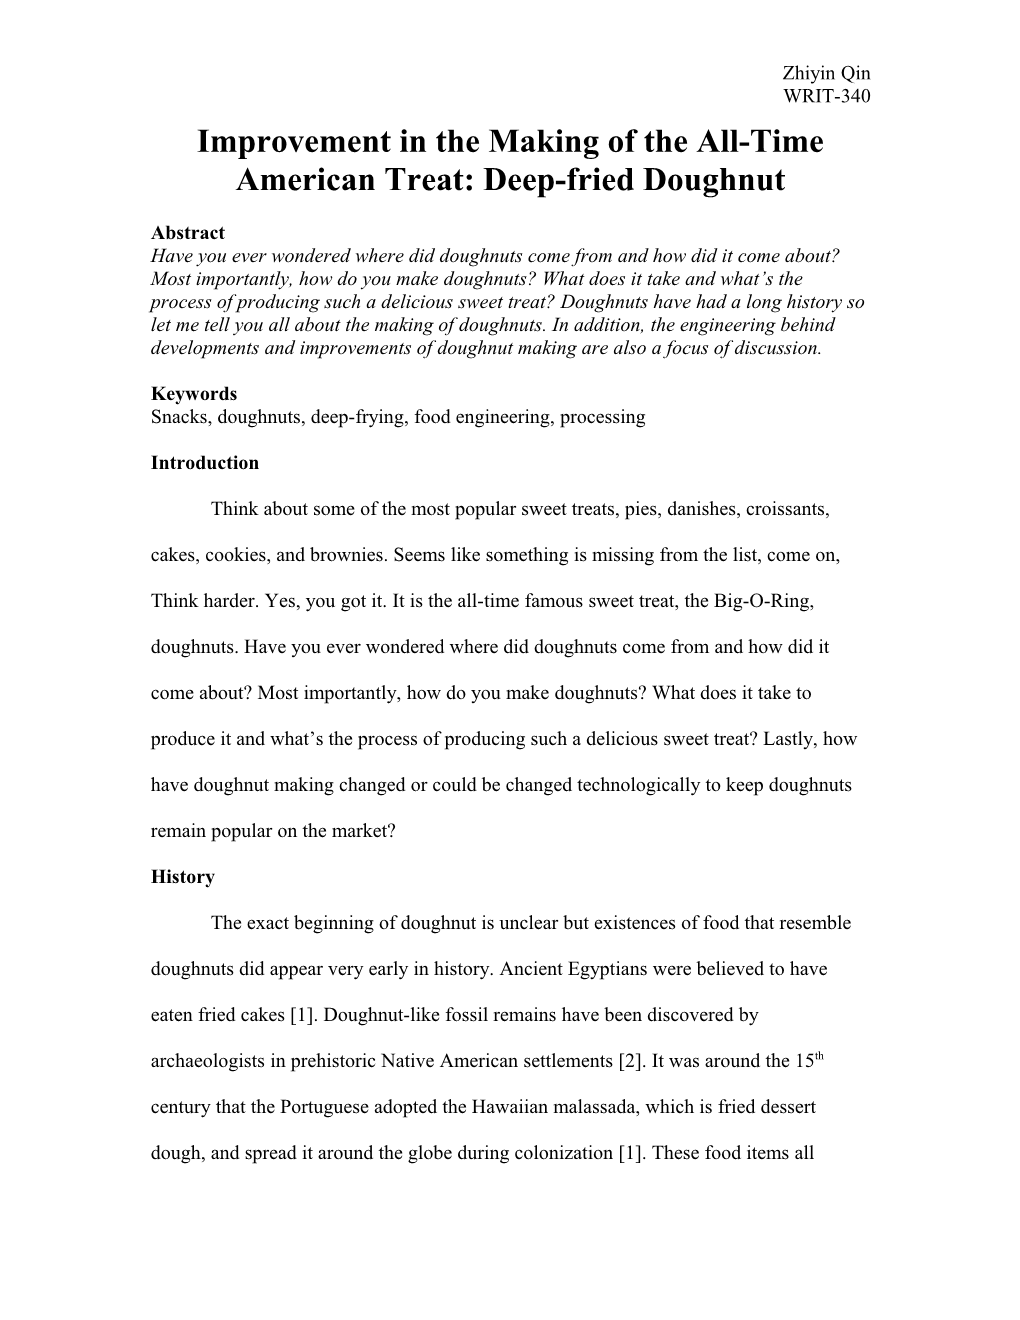 Improvement in the Making of the All-Time American Treat: Deep-Fried Doughnut